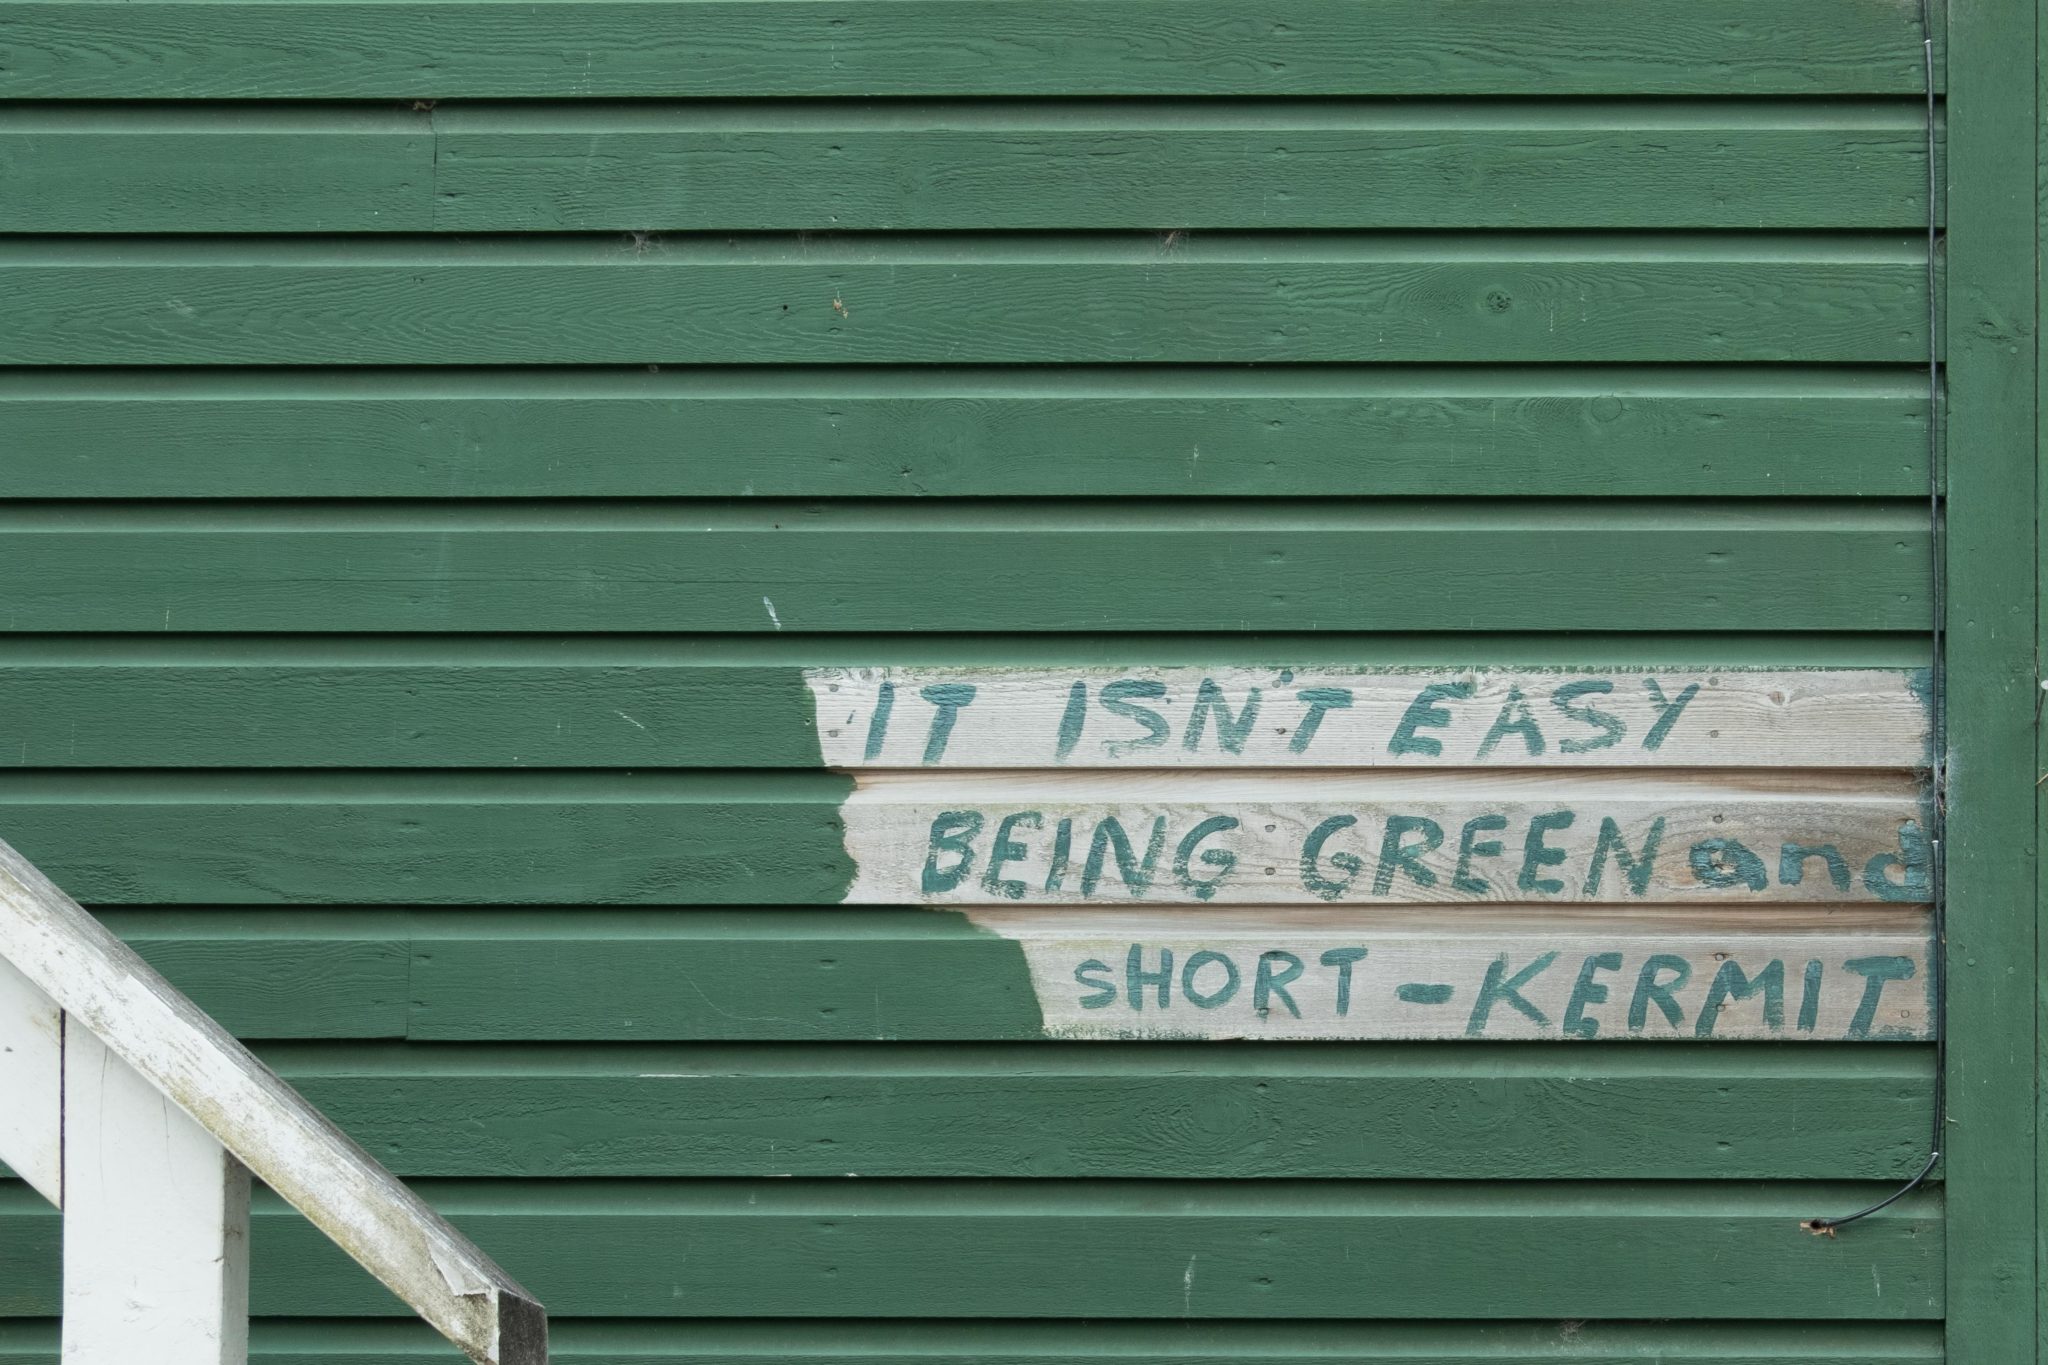 It isn't easy being green and short